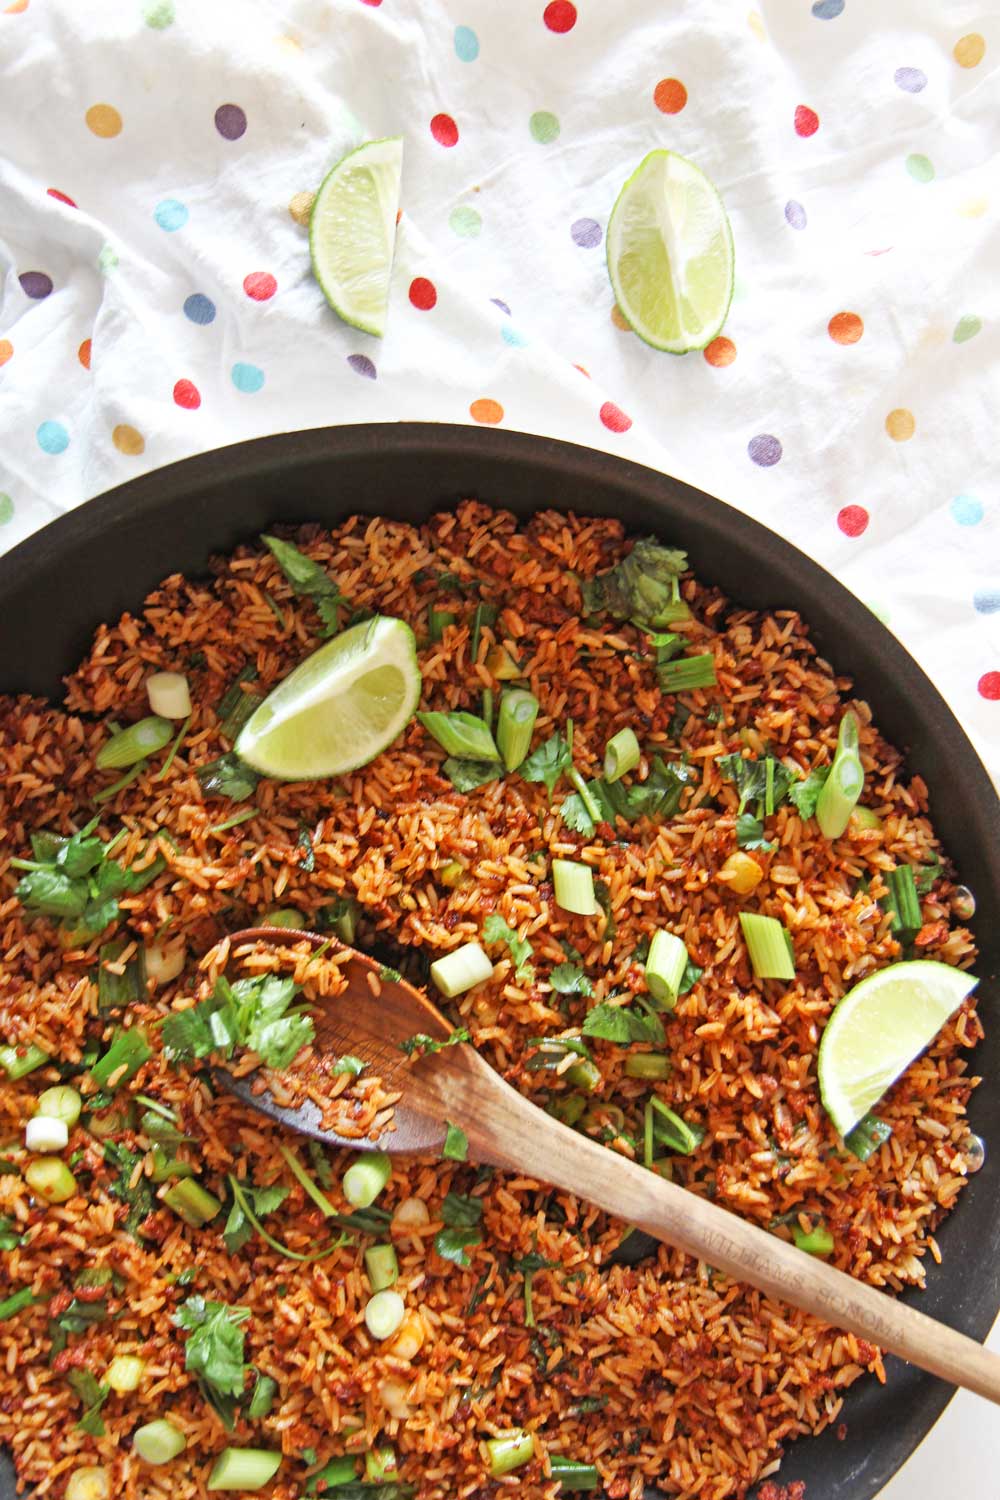 5 Ingredient Taco Fried Rice. Easy dinner for busy families. Rice, chorizo, scallions, cilantro, and lime. Also amazing leftovers. Happy Cooking! www.ChopHappy.com #friedrice #taco